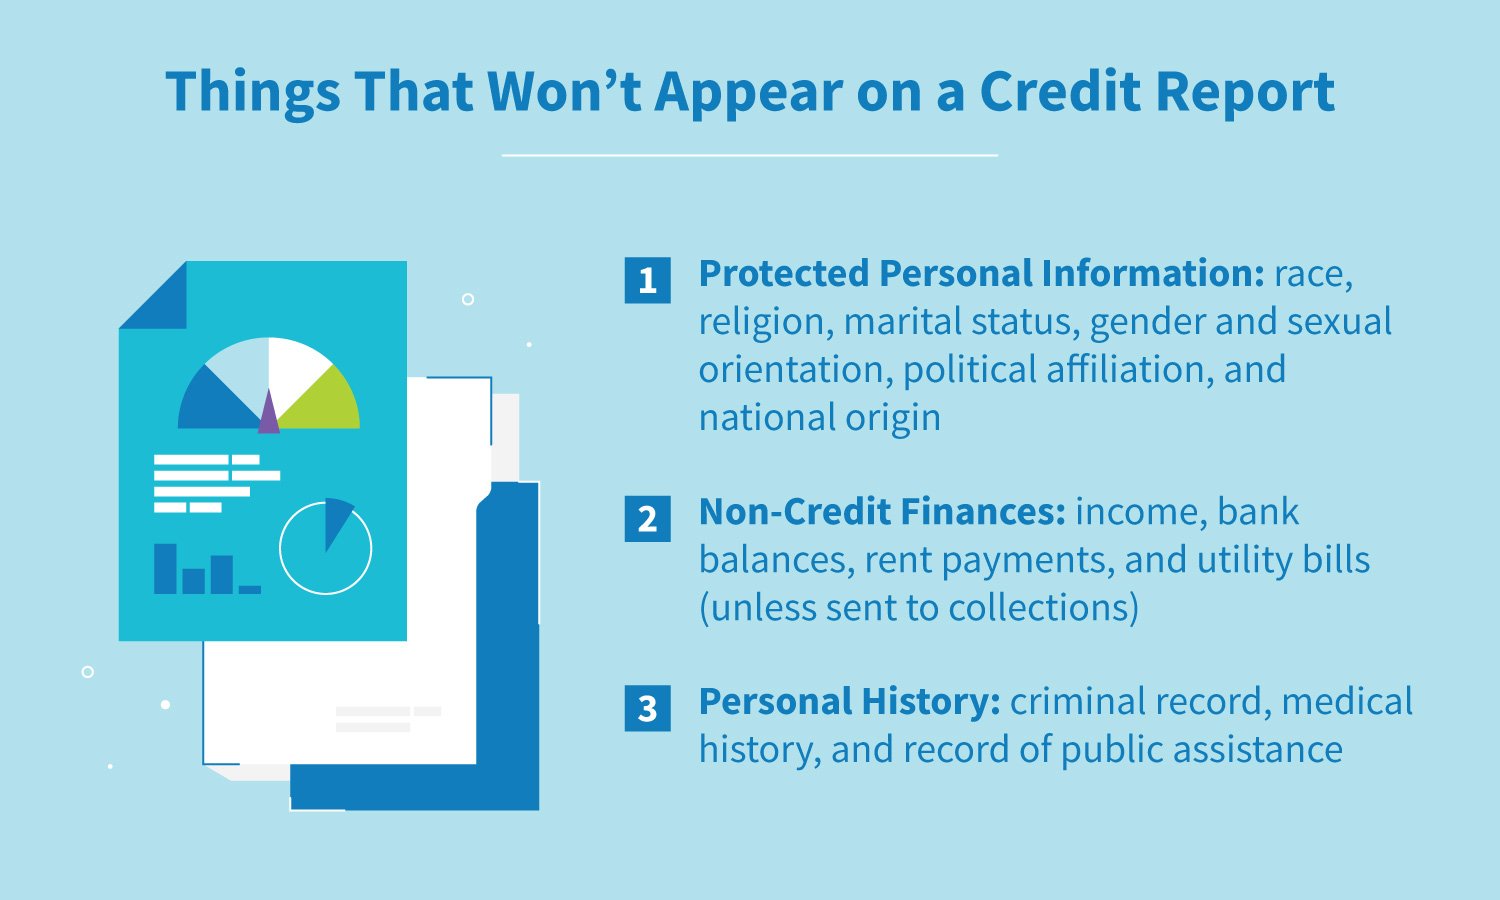 What Are Credit Reporting Agencies?